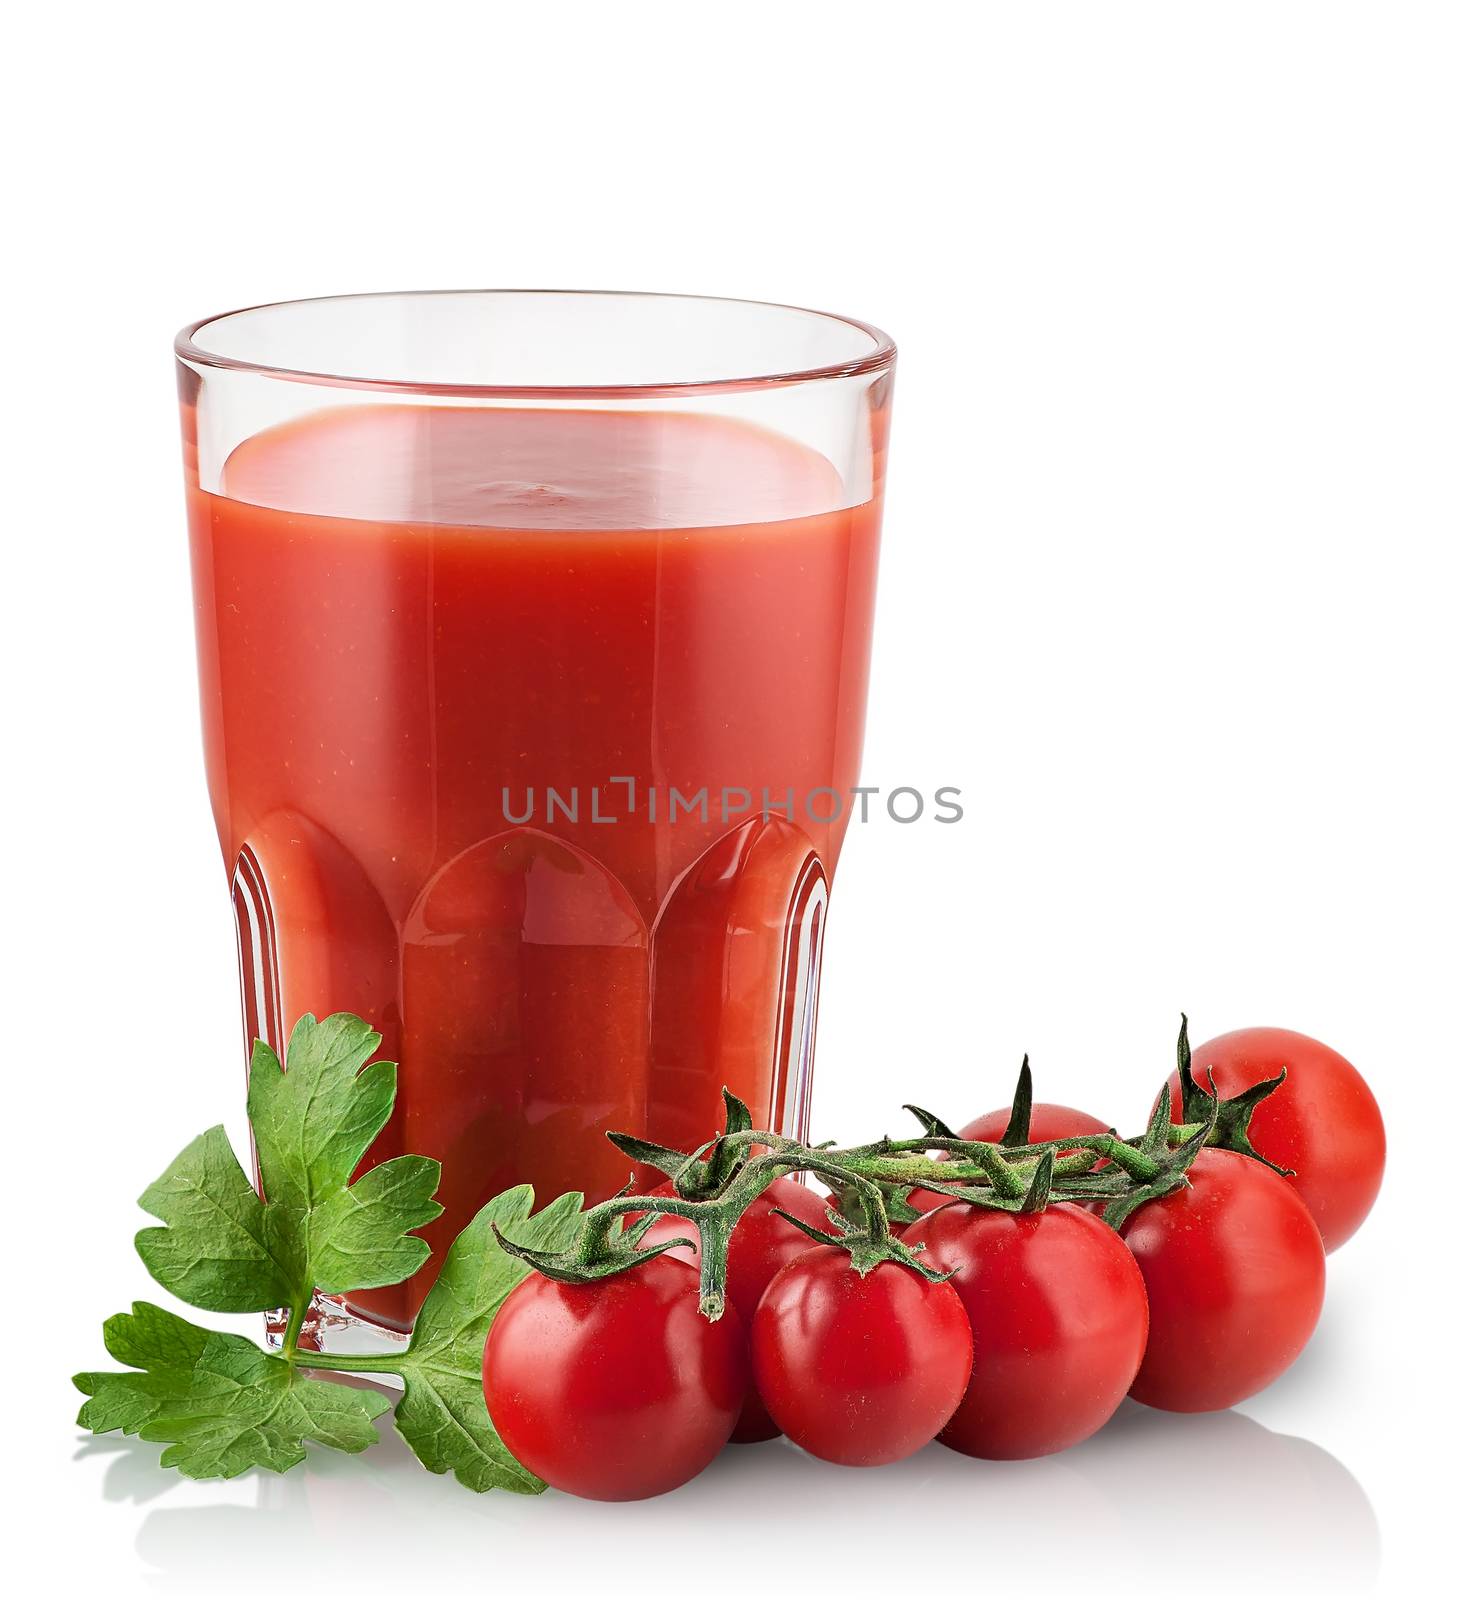 Cherry tomatoes with tomato juice by Cipariss